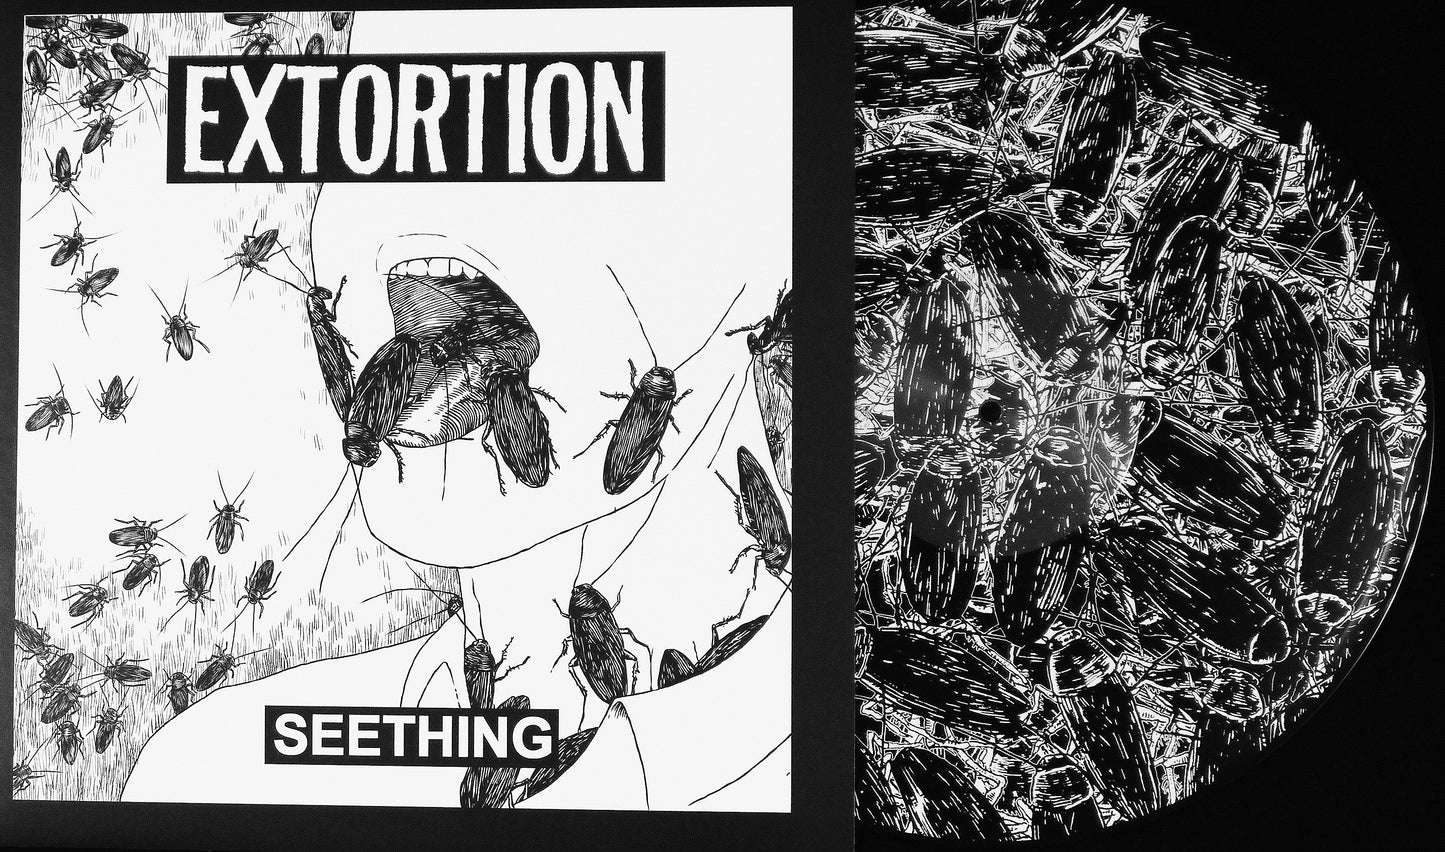 EXTORTION - Seething 12" S/Sided Screen Printed